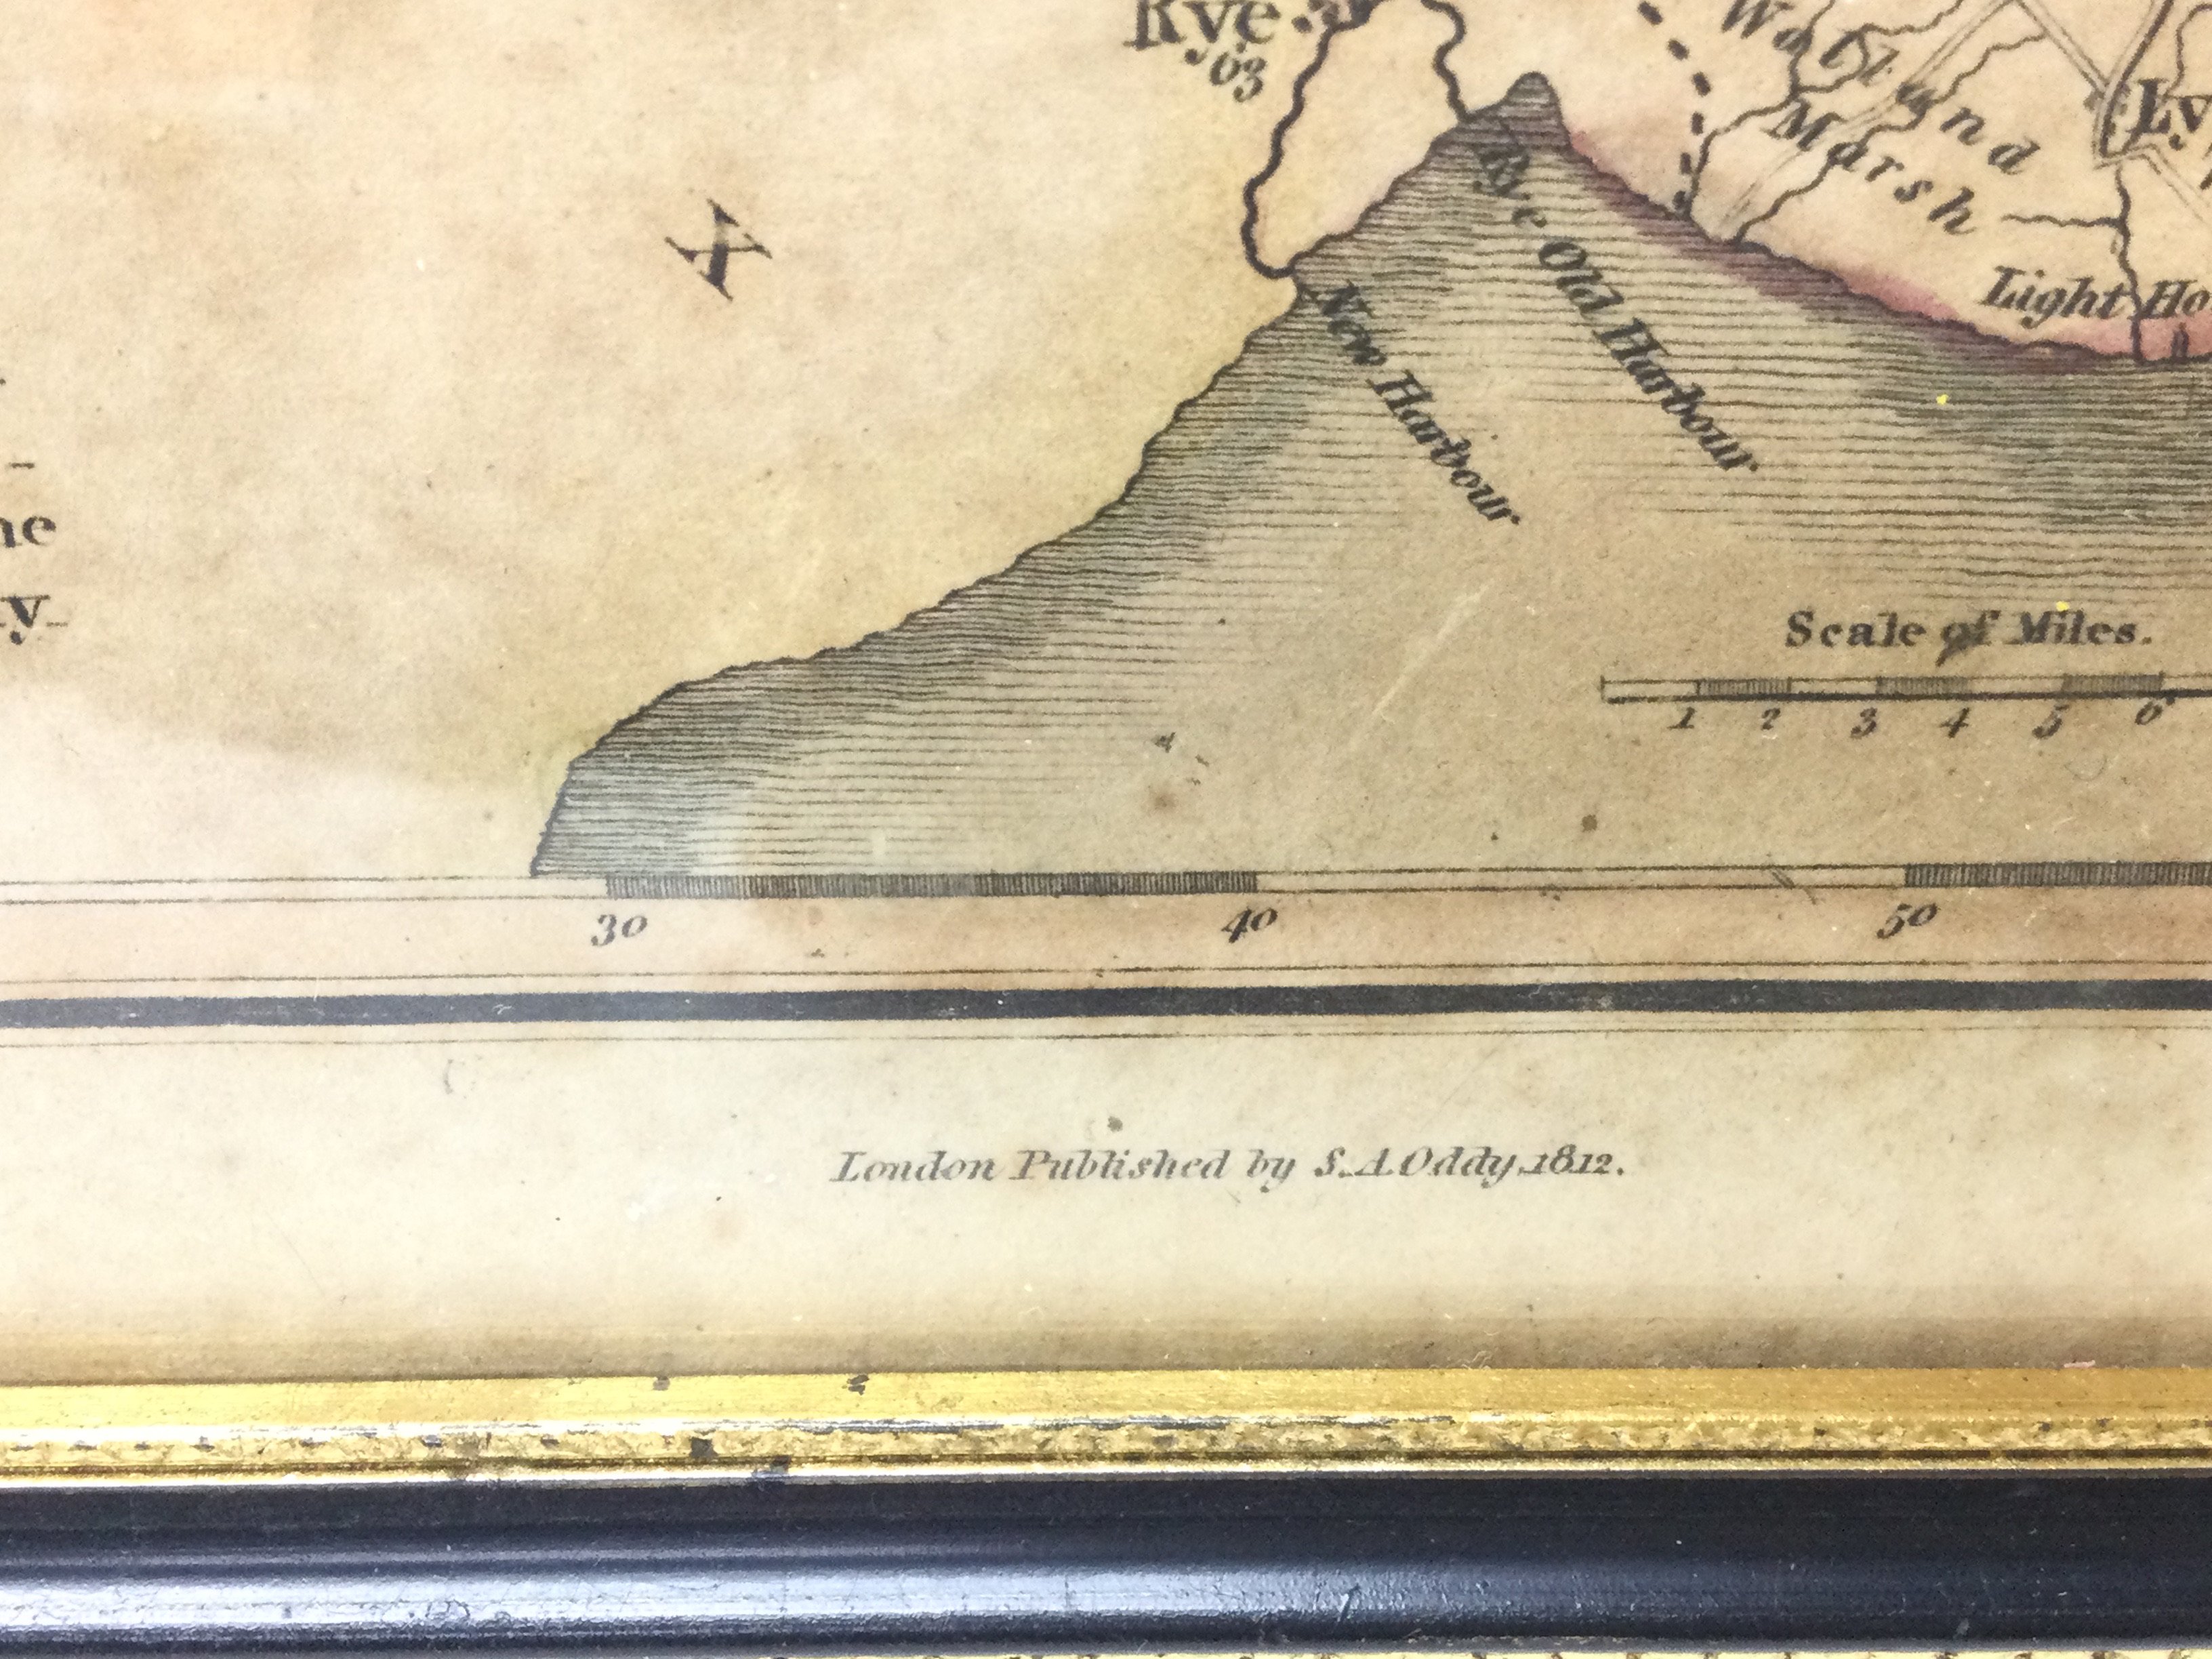 A Framed 1812 Hand Coloured Map Of Kent by S.A. Od - Image 2 of 2